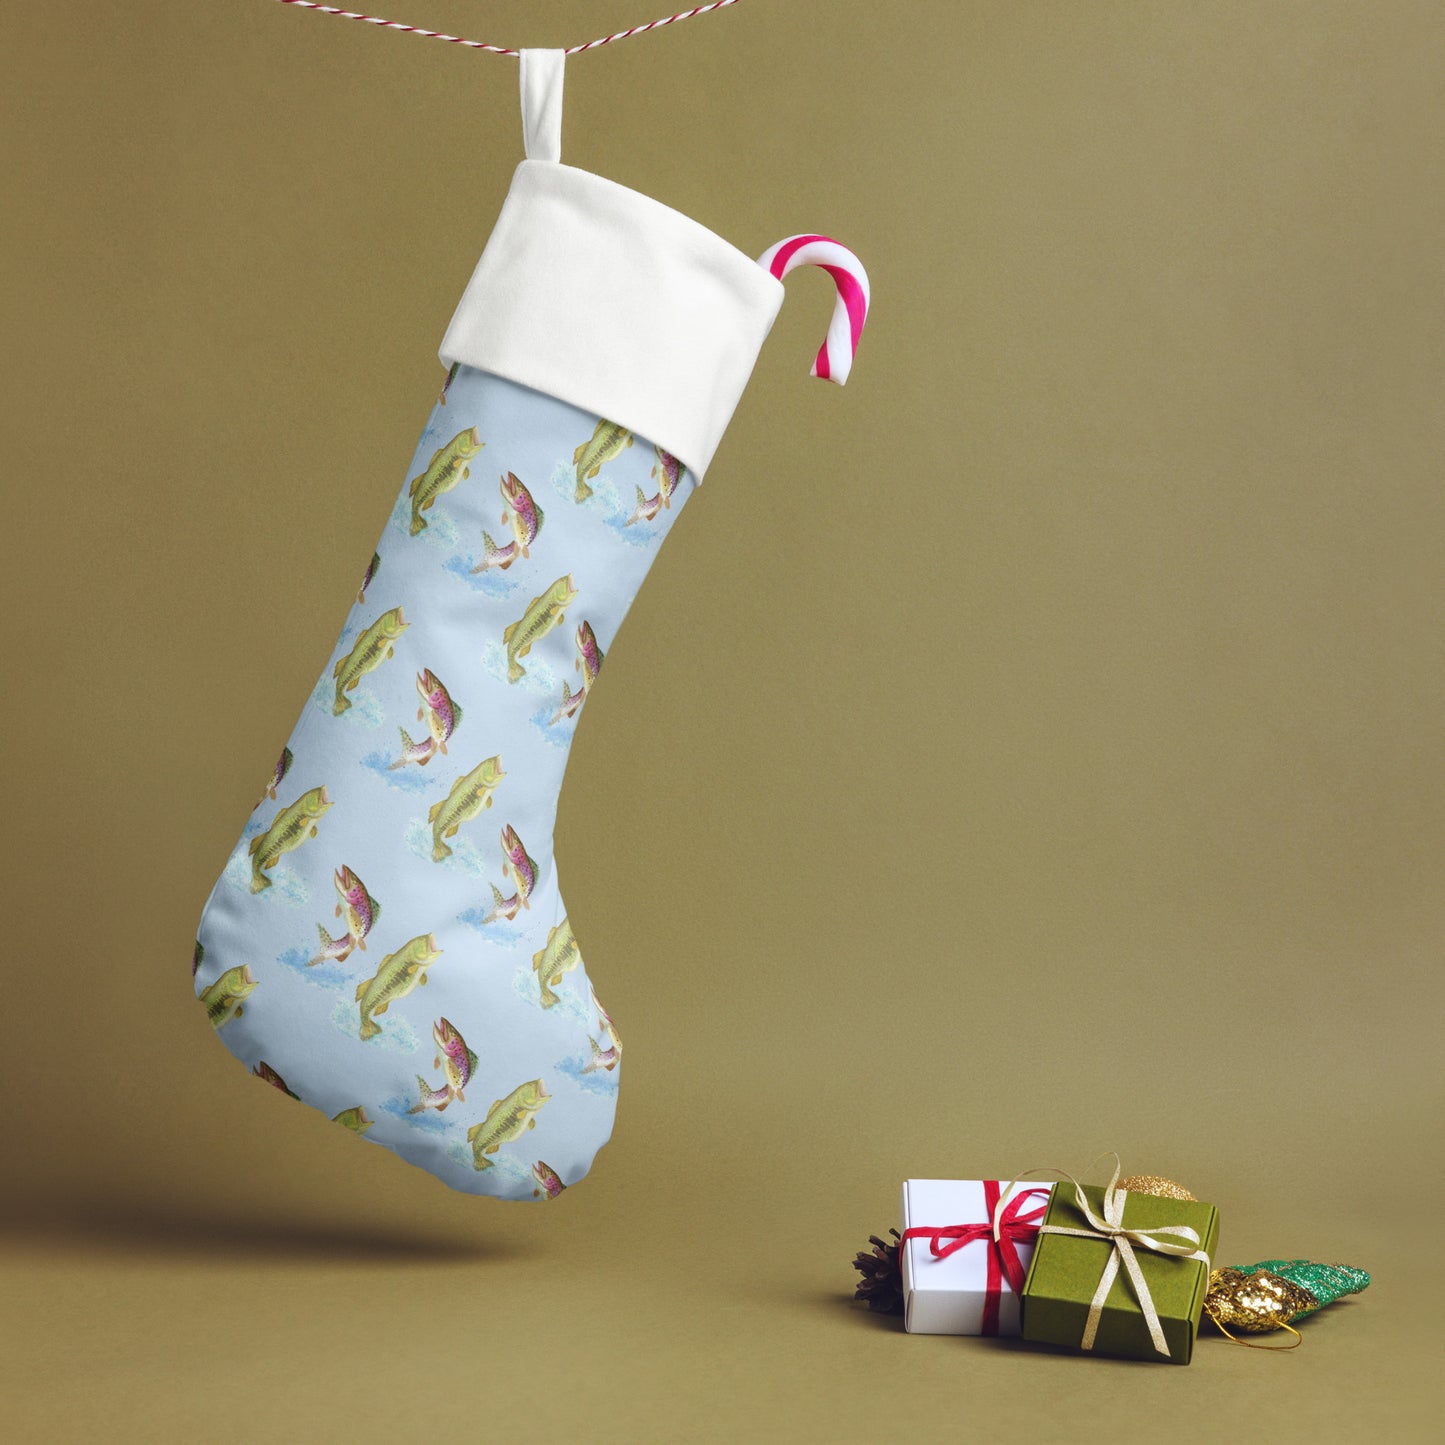 Limited Edition Blue Fishing Christmas Stocking.  7 by 18 inches. The front has watercolor rainbow trout and largemouth bass patterned on a blue background and an off-white polyester back fabric. It has a white fold-over cuff and a hanging loop. Shown hanging from a string.